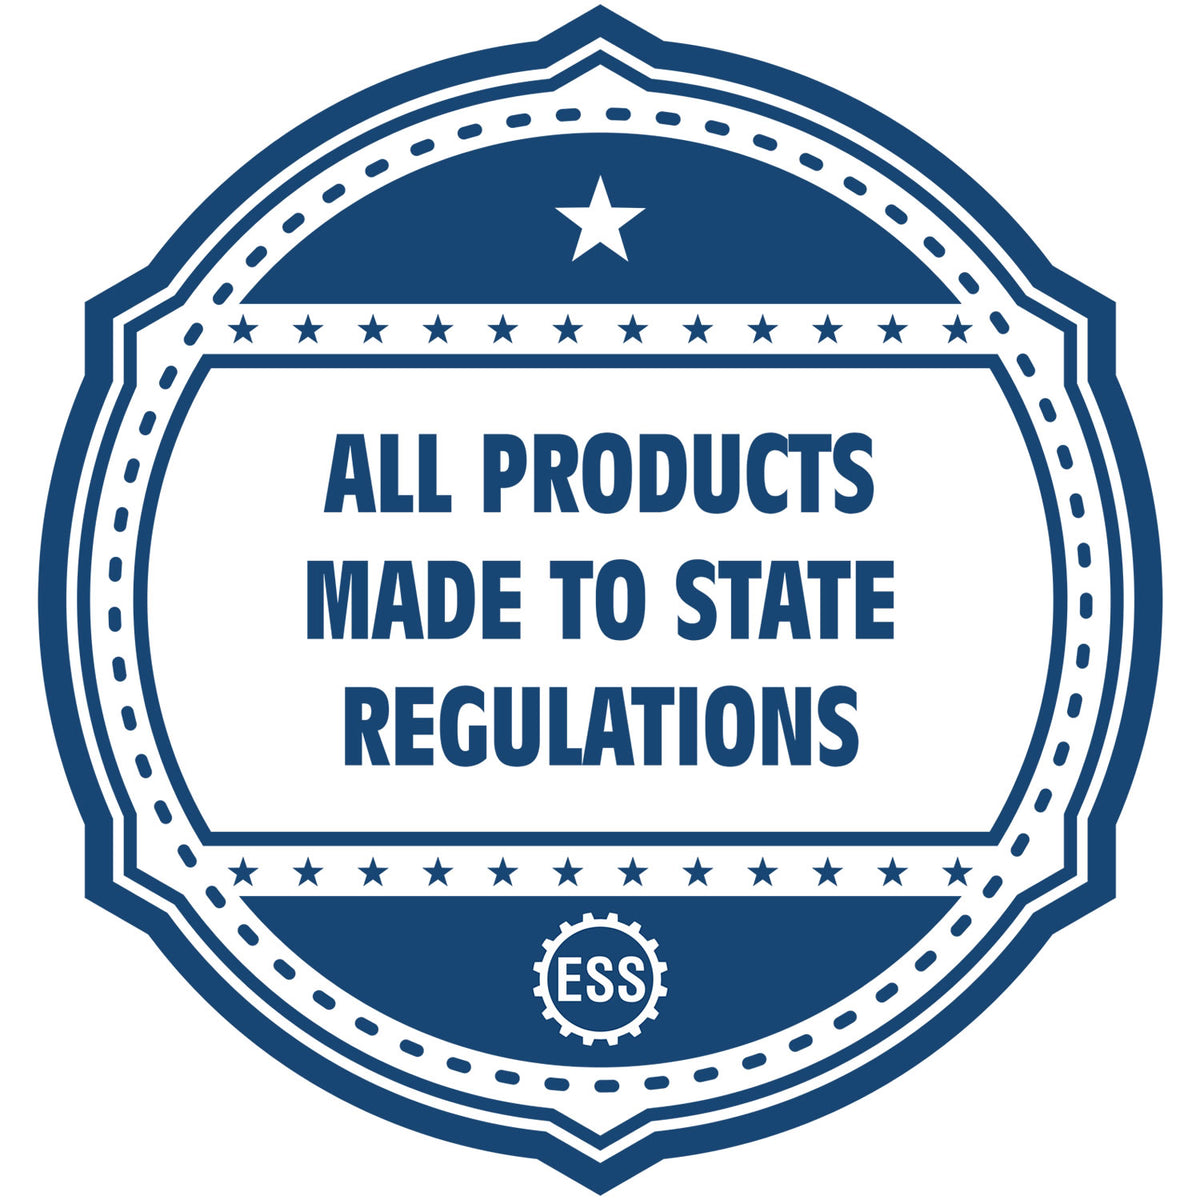 A blue icon or badge for the Slim Pre-Inked New Hampshire Professional Geologist Seal Stamp showing that this product is made in compliance with state regulations.